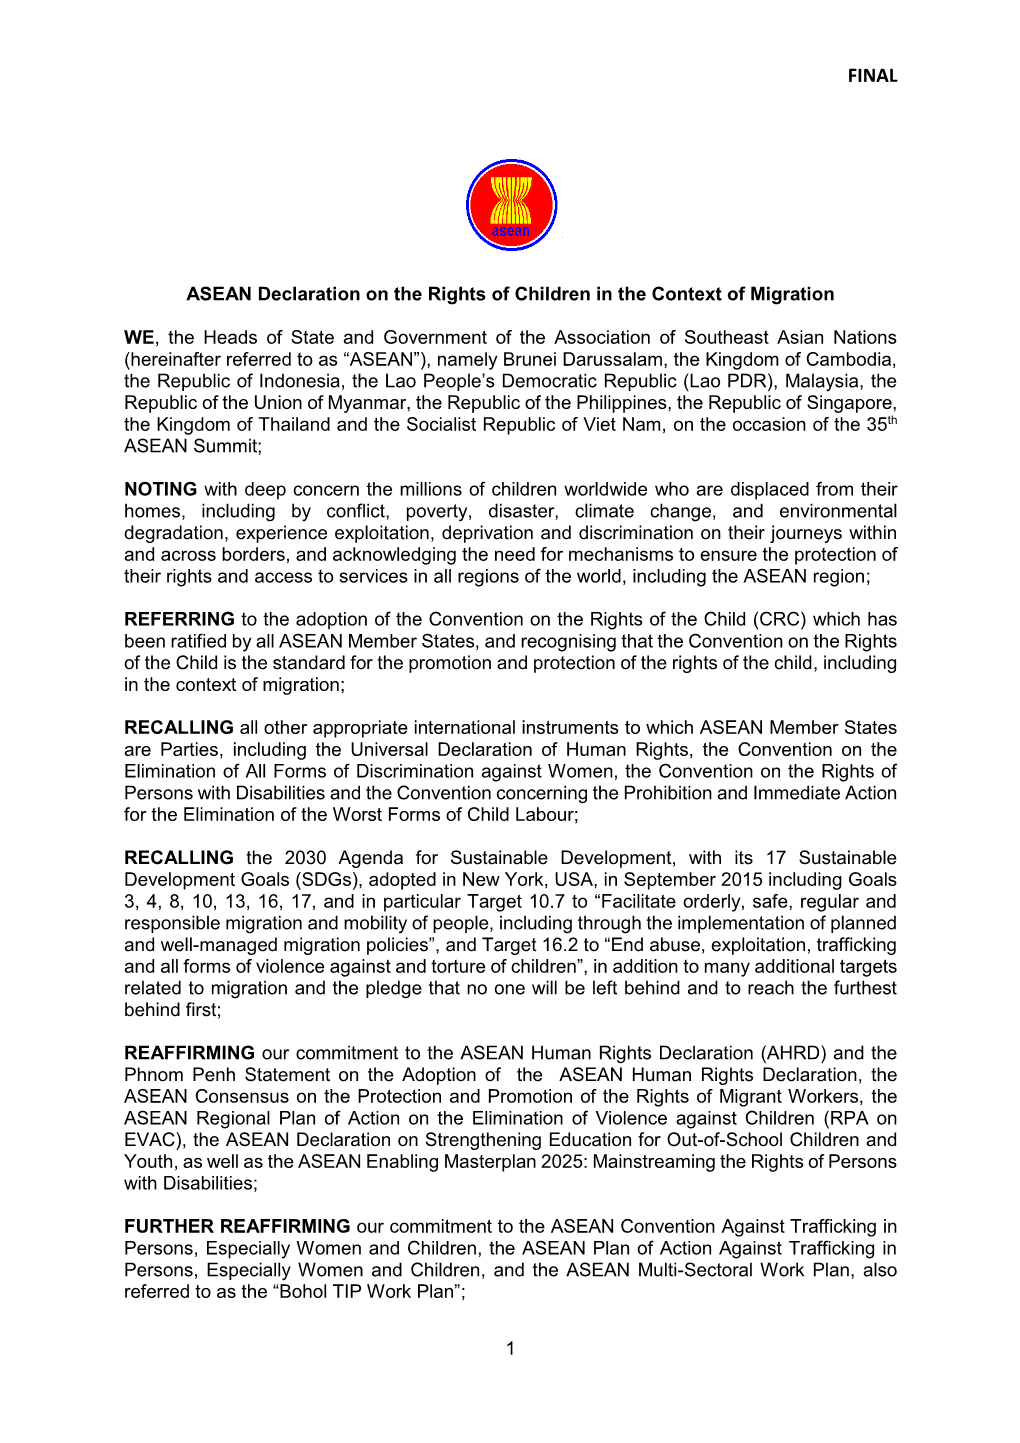 ASEAN Declaration on the Rights of Children in the Context of Migration